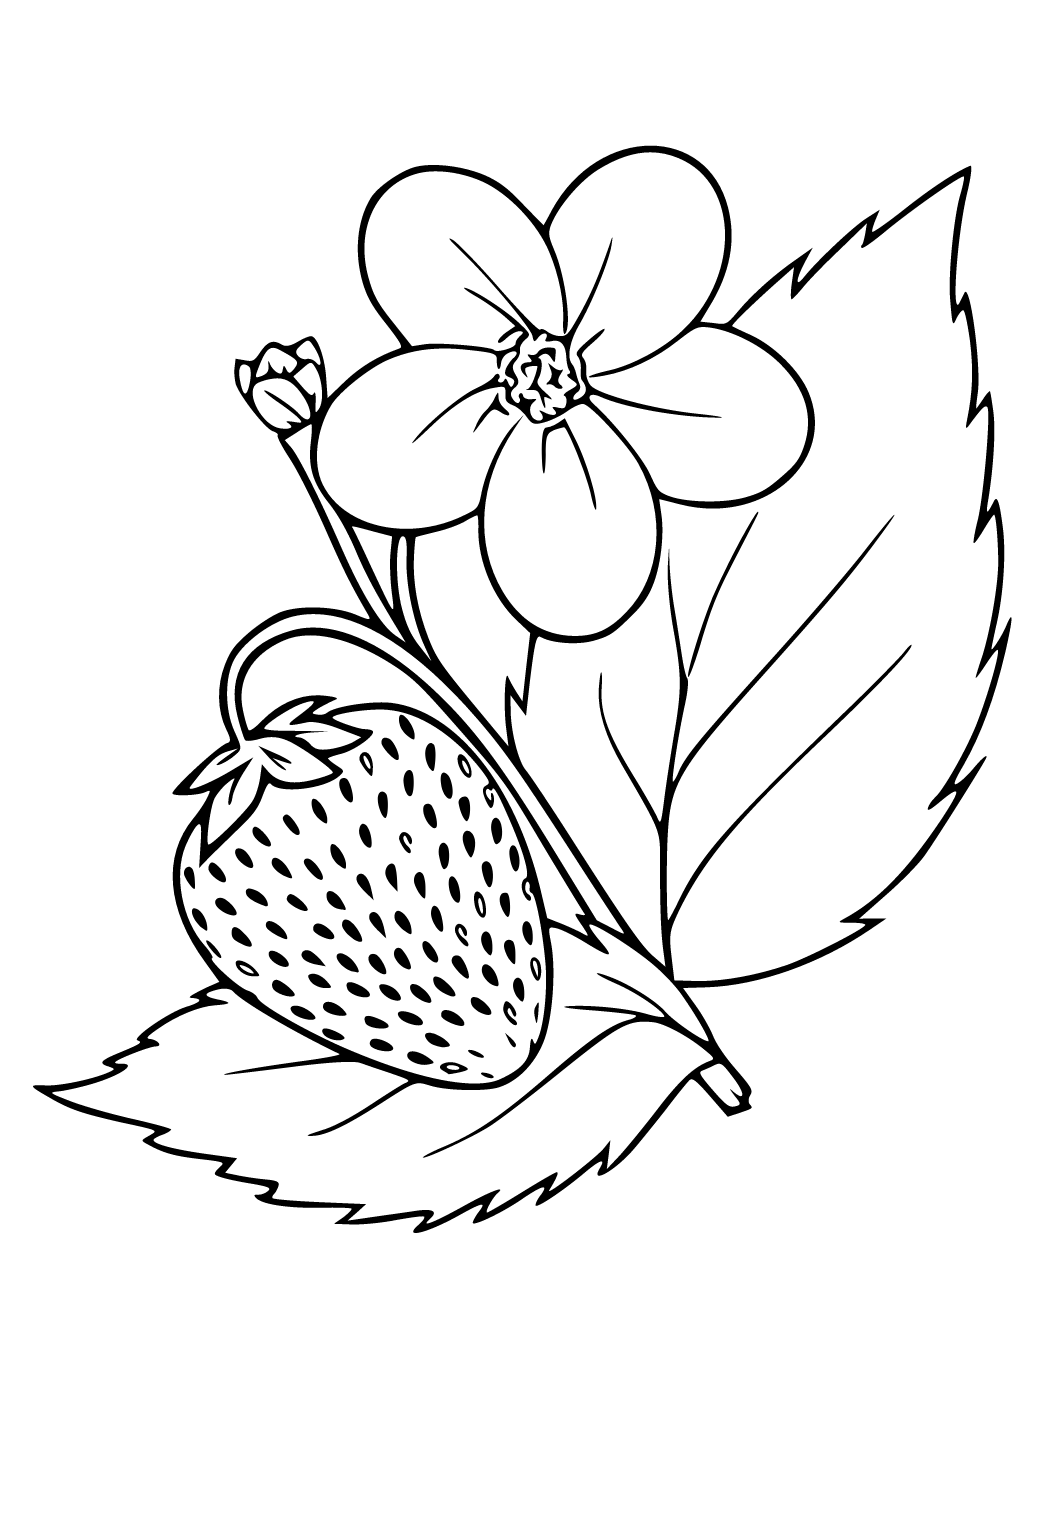 Free printable plant strawberry coloring page for adults and kids